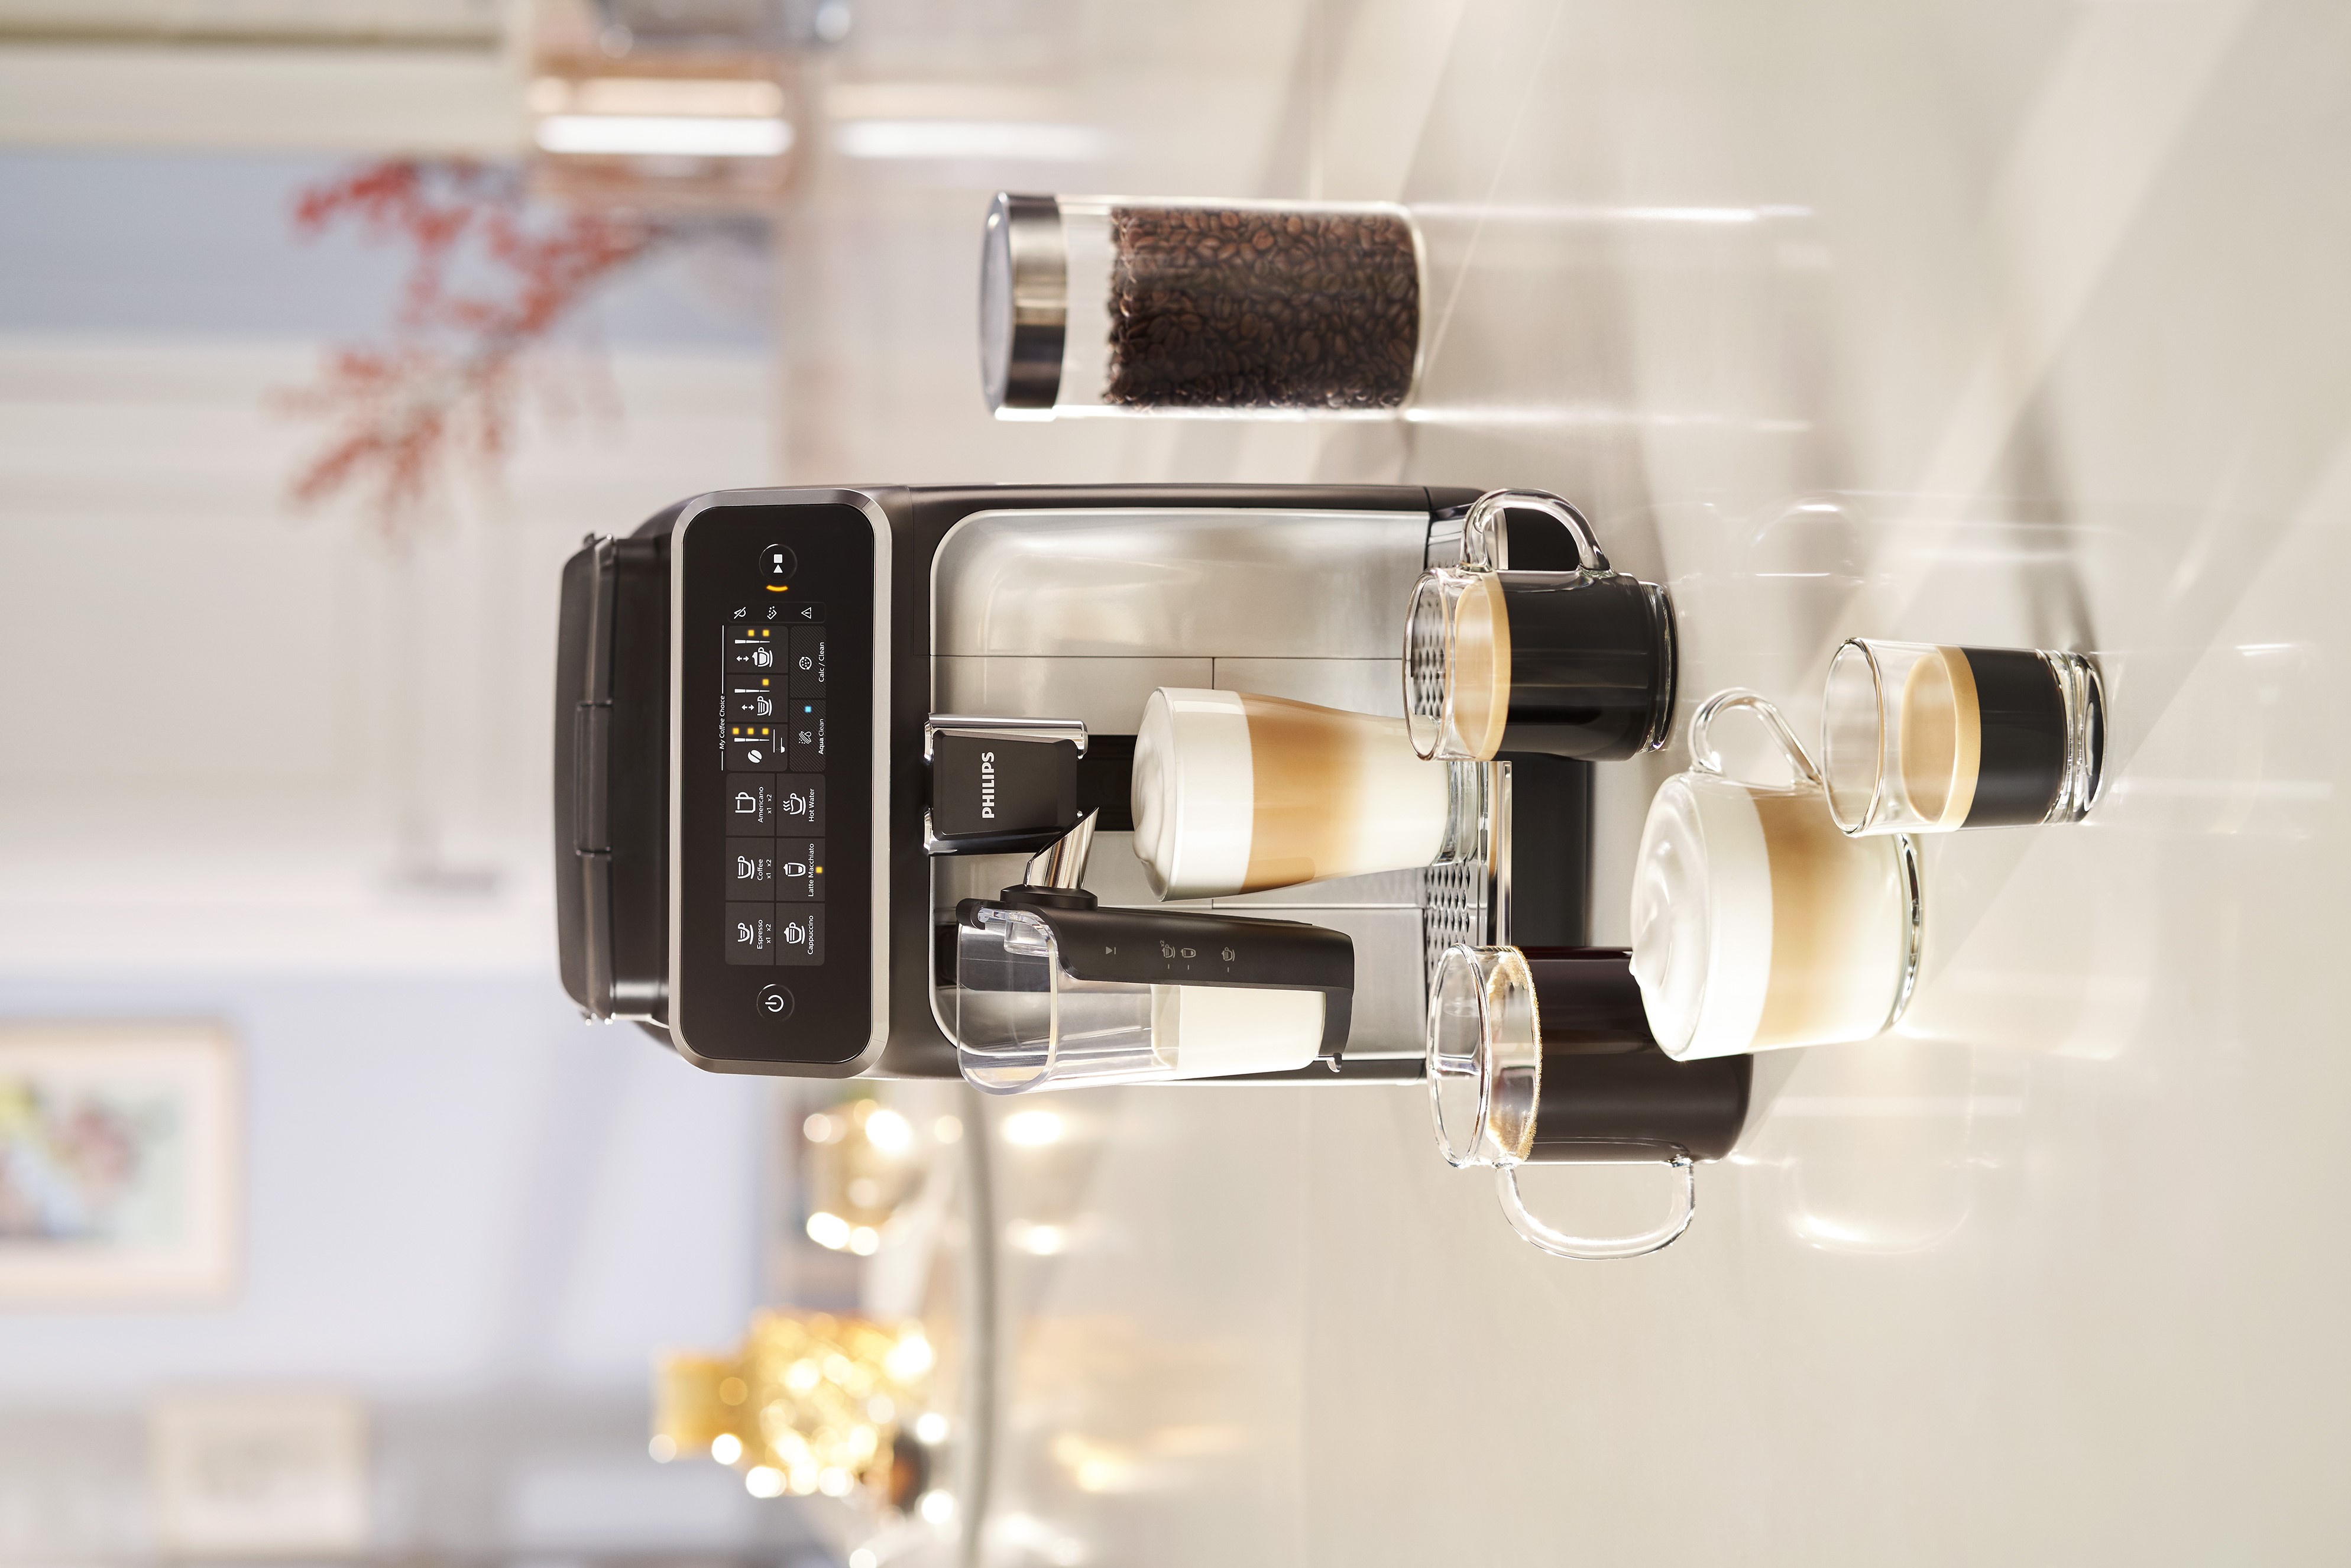 Taking A Break With The Philips LatteGo Coffee Machine